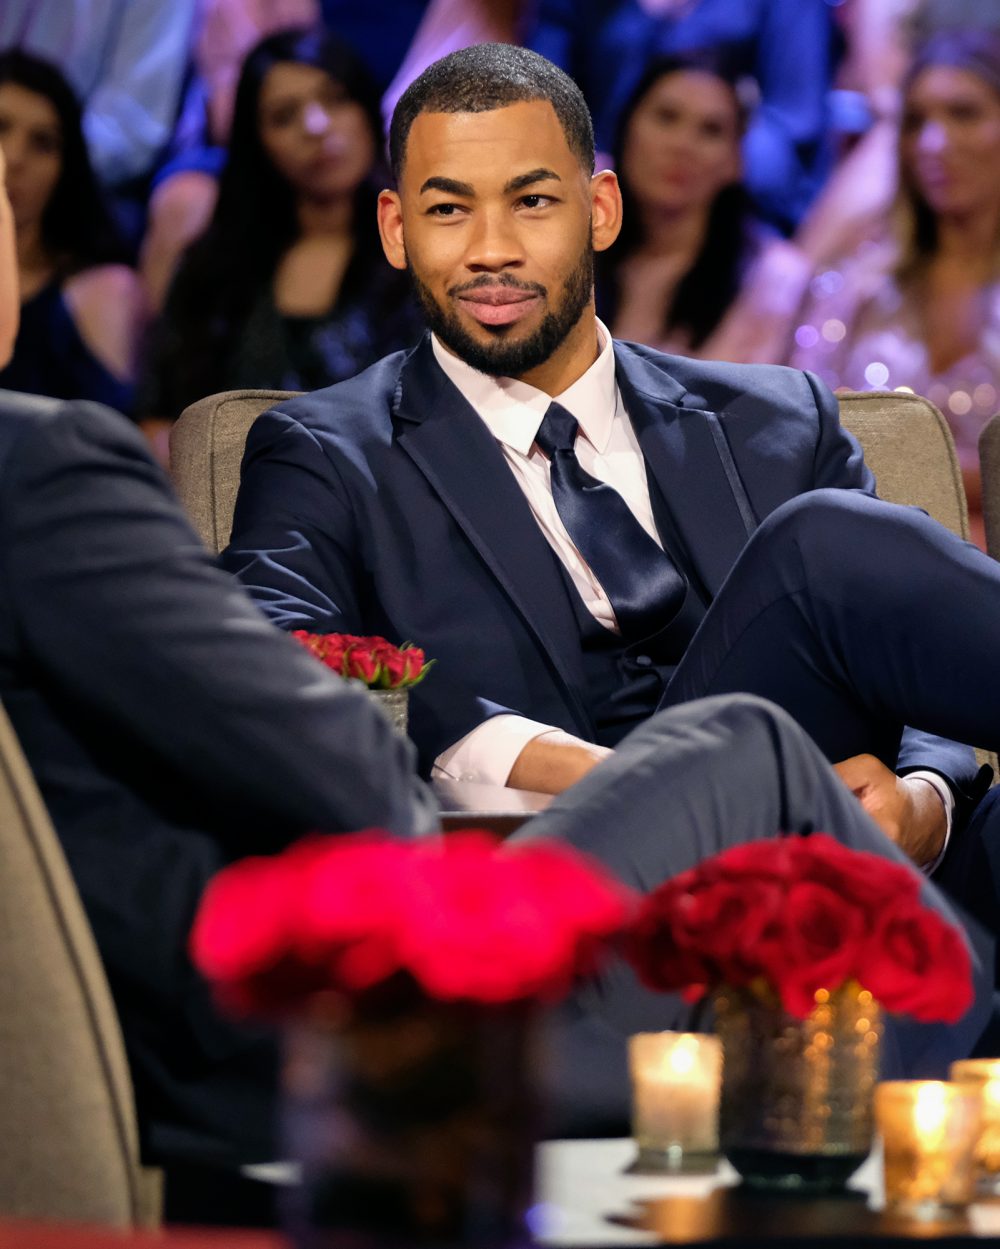 Who Will Be the Next ‘Bachelor’ Mike Johnson